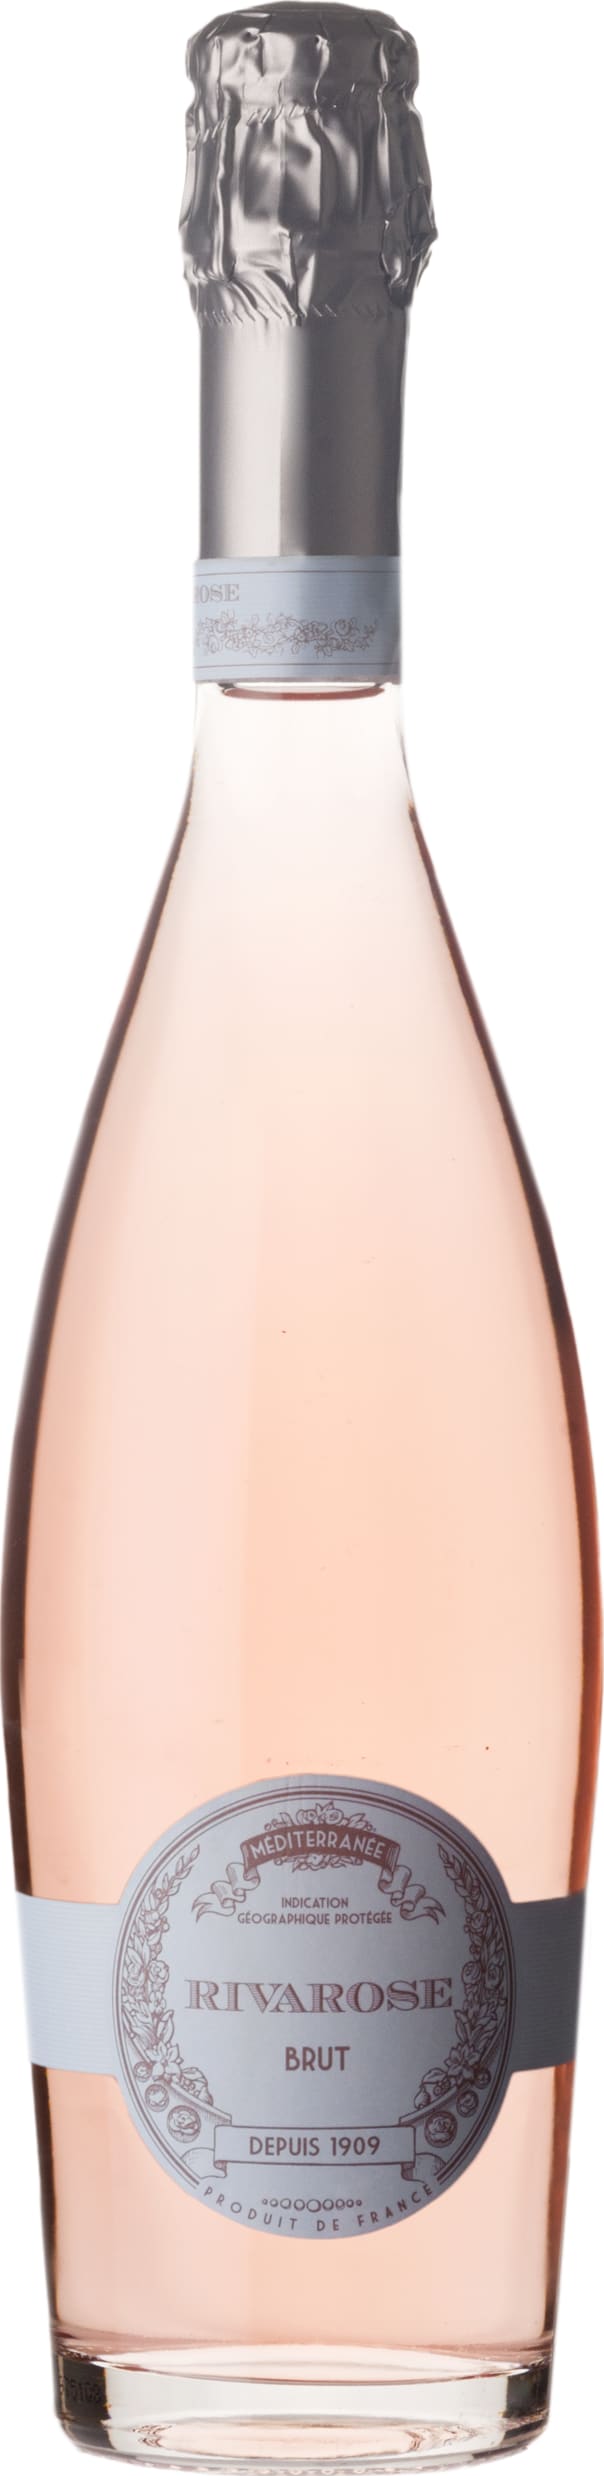 Veuve Ambal Rose Brut 75cl NV - Buy Veuve Ambal Wines from GREAT WINES DIRECT wine shop